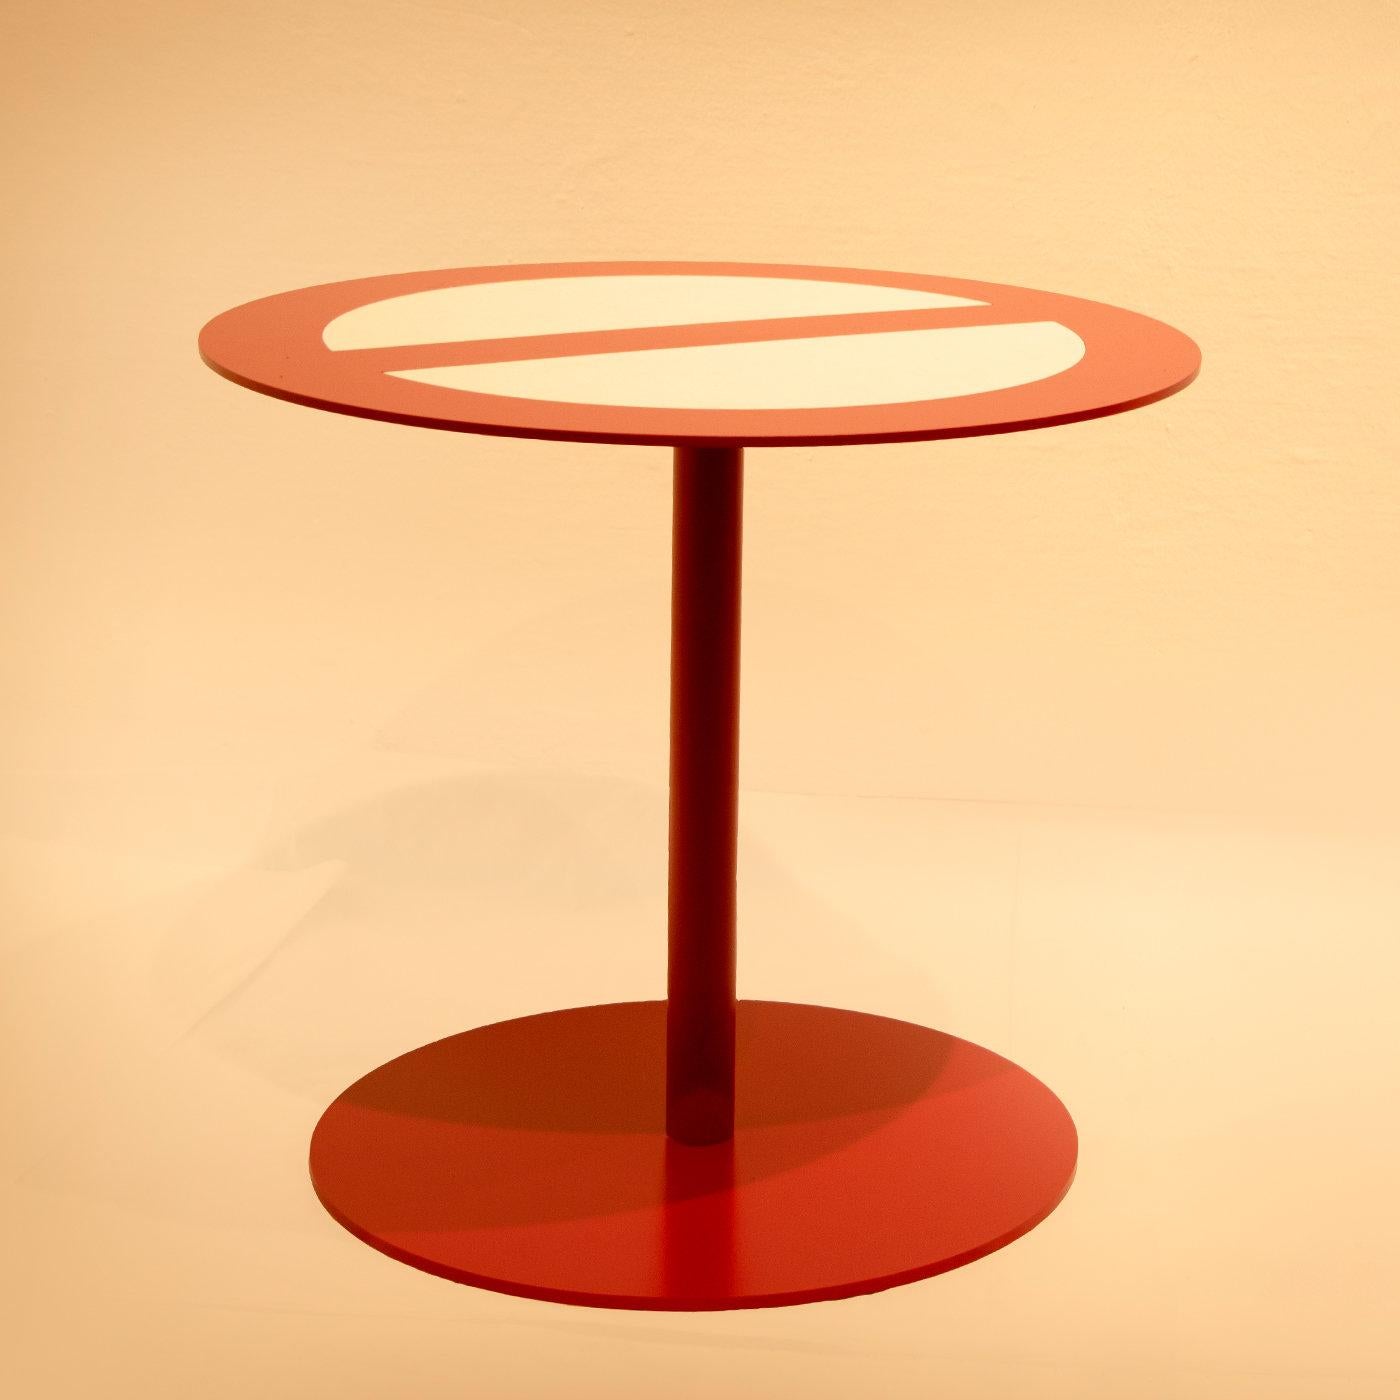 Entirely crafted by hand, this iron coffee table is a decor piece that will infuse a unique character to an eclectic home or office decor. Featuring a red-finished pedestal leg and circular base, the top reproduces a 